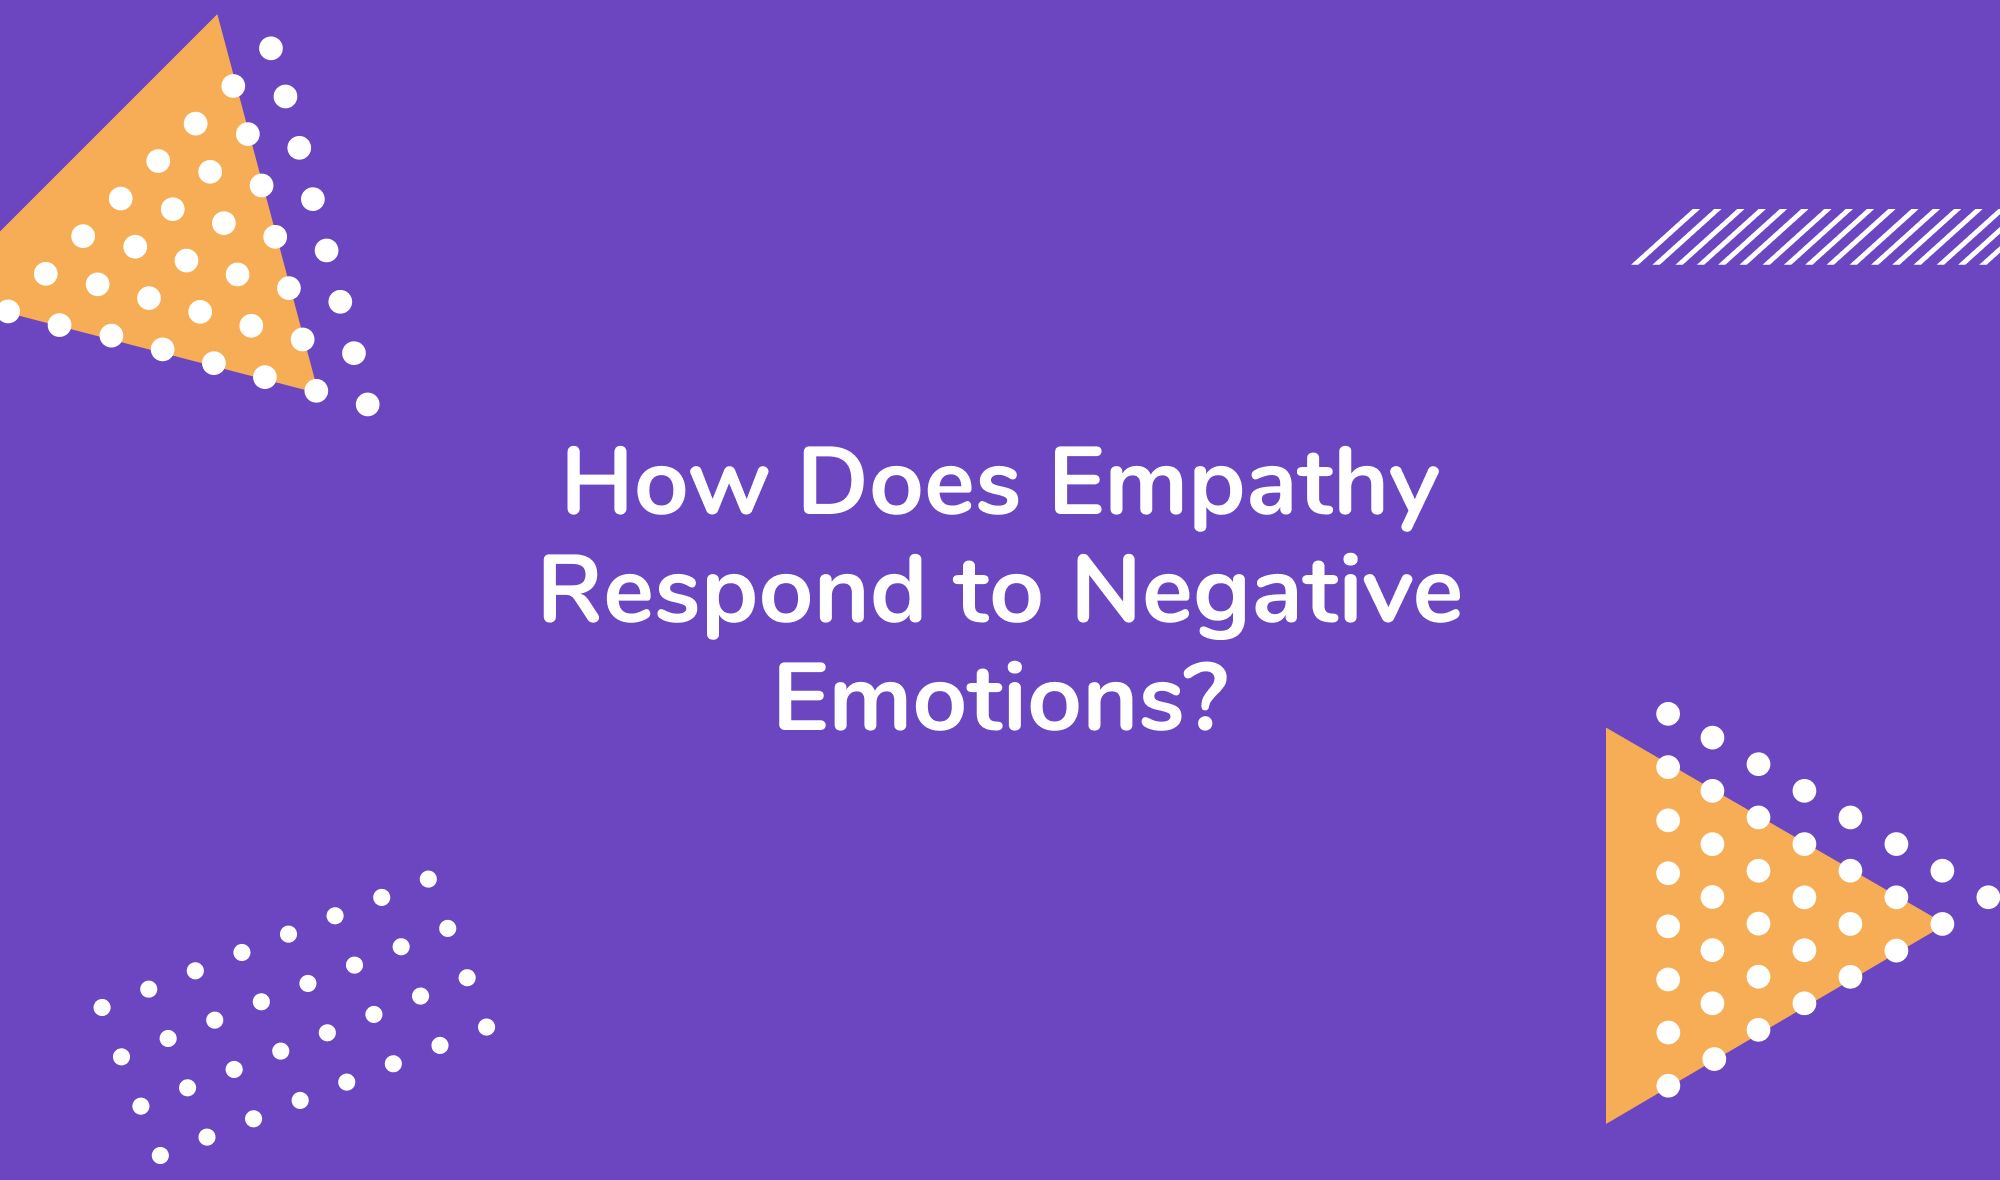 How Does Empathy Respond to Negative Emotions?